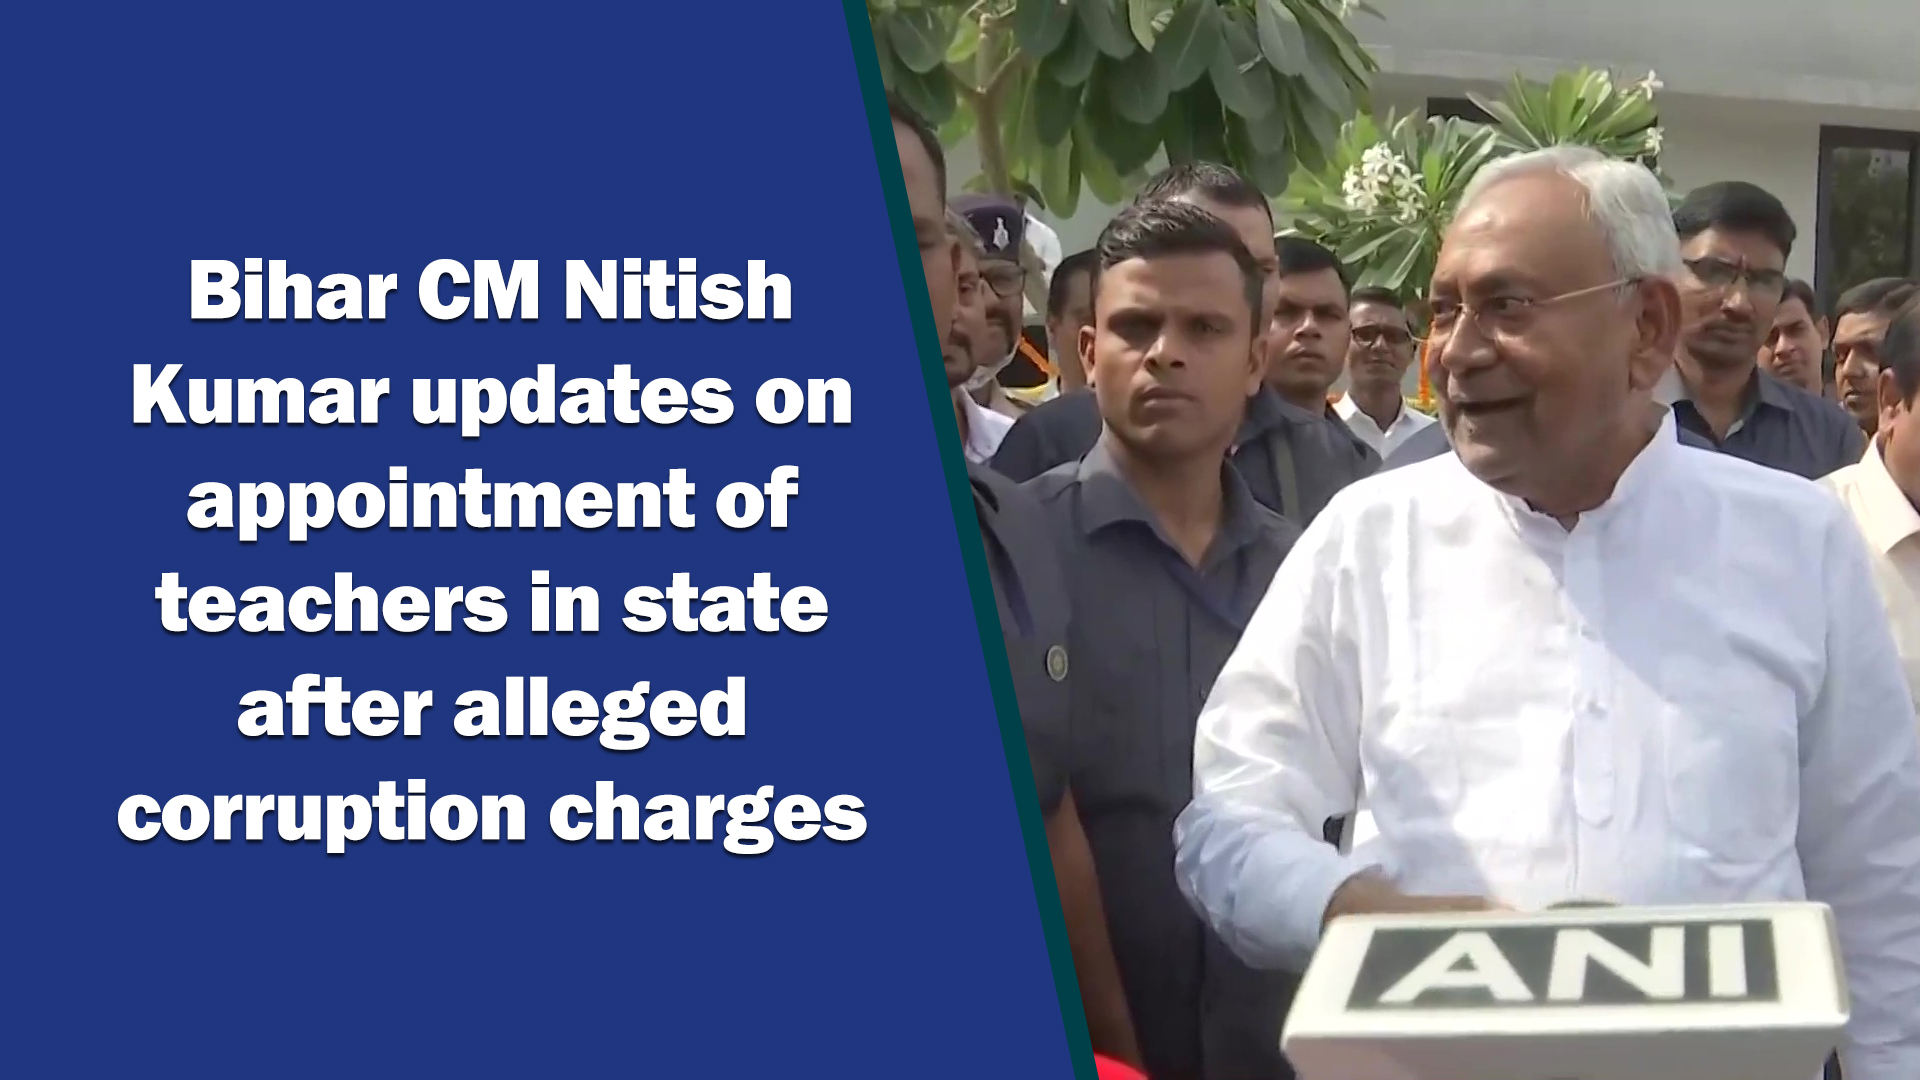 Bihar CM Nitish Kumar updates on appointment of teachers in state after alleged corruption charges